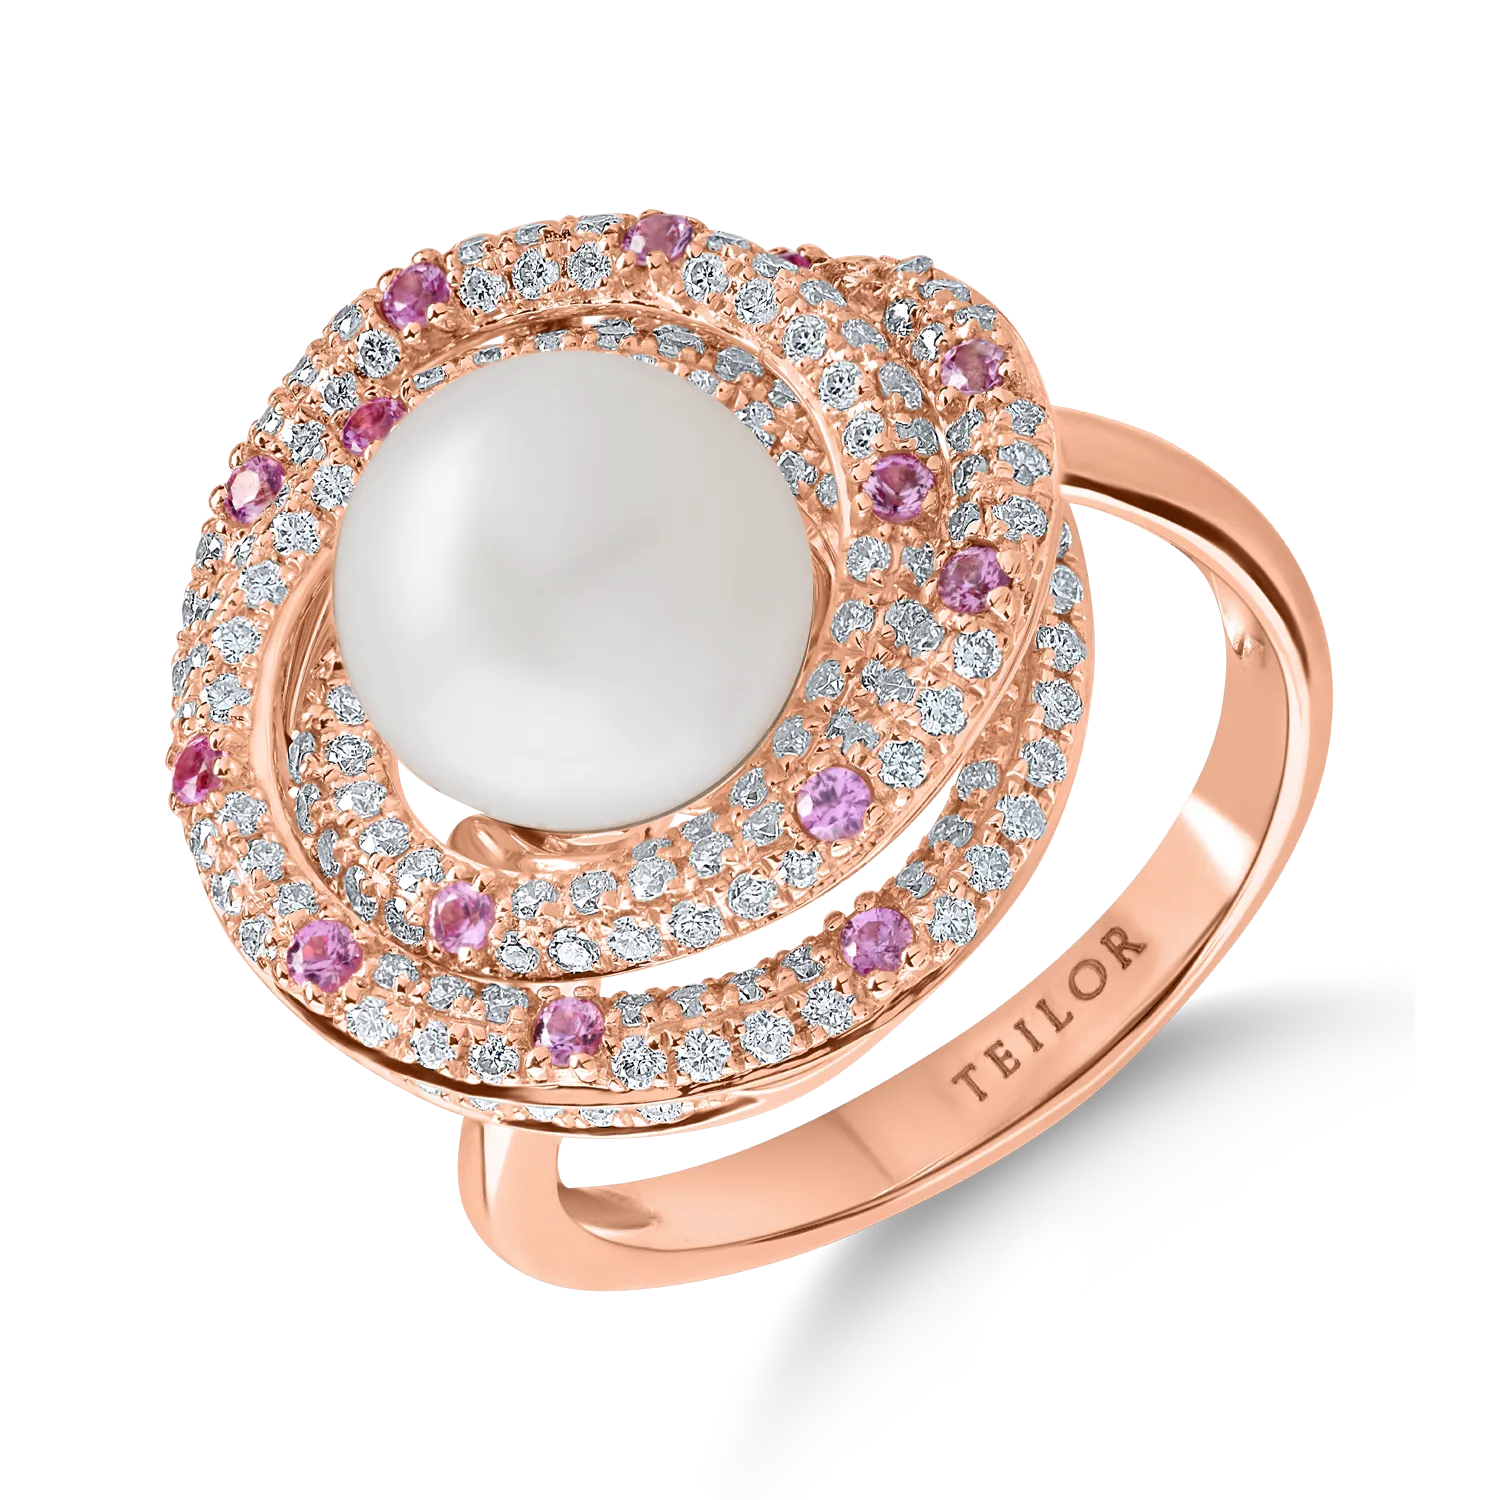 Rose gold ring with 5.6ct precious and semi-precious stones